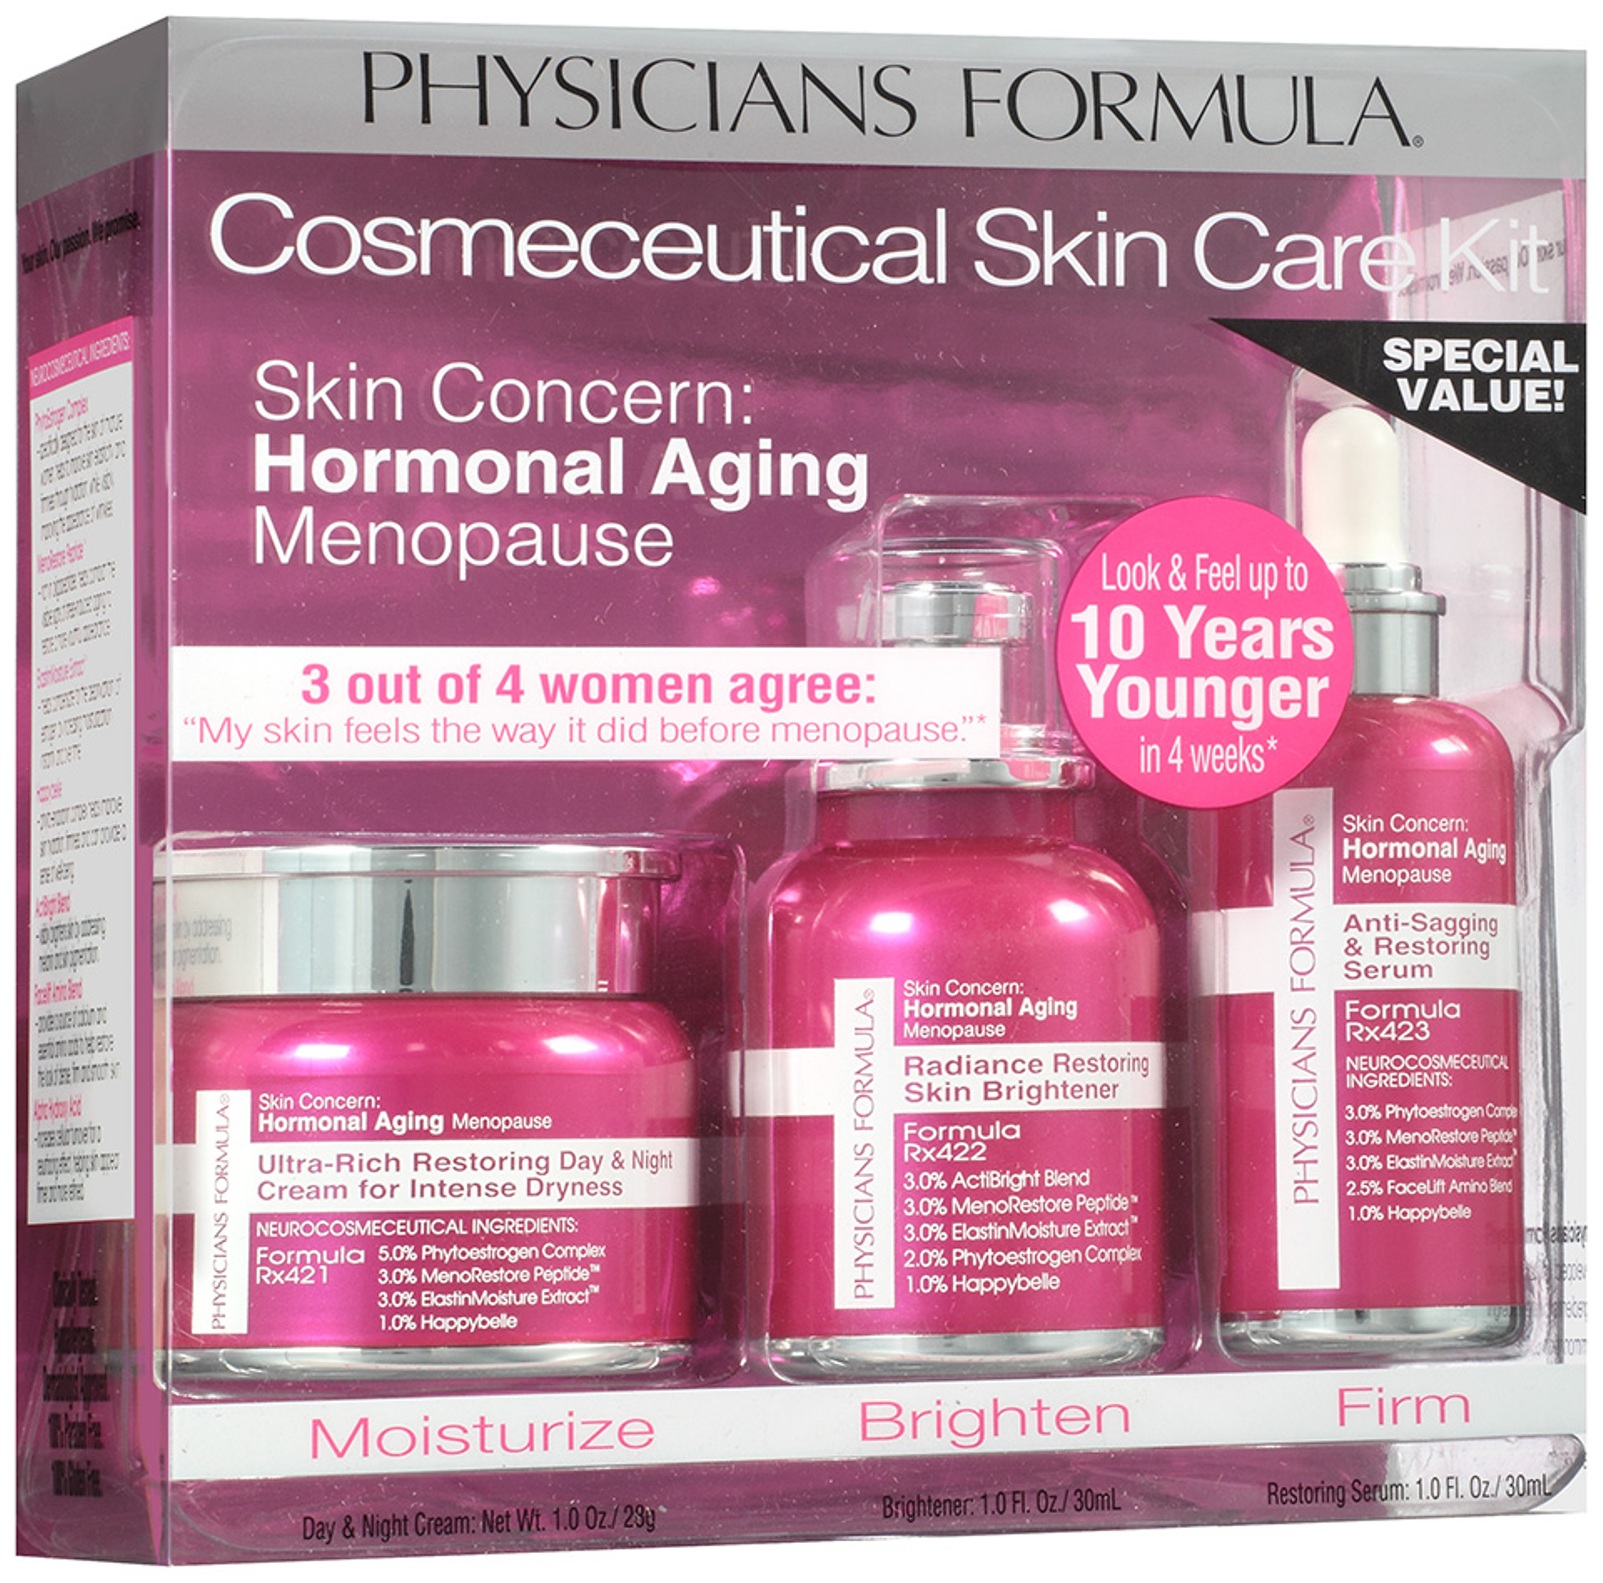 Physicians Formula Skin Care Kit, Skin Concern: Hormonal Aging Menopause Cosmeceutical